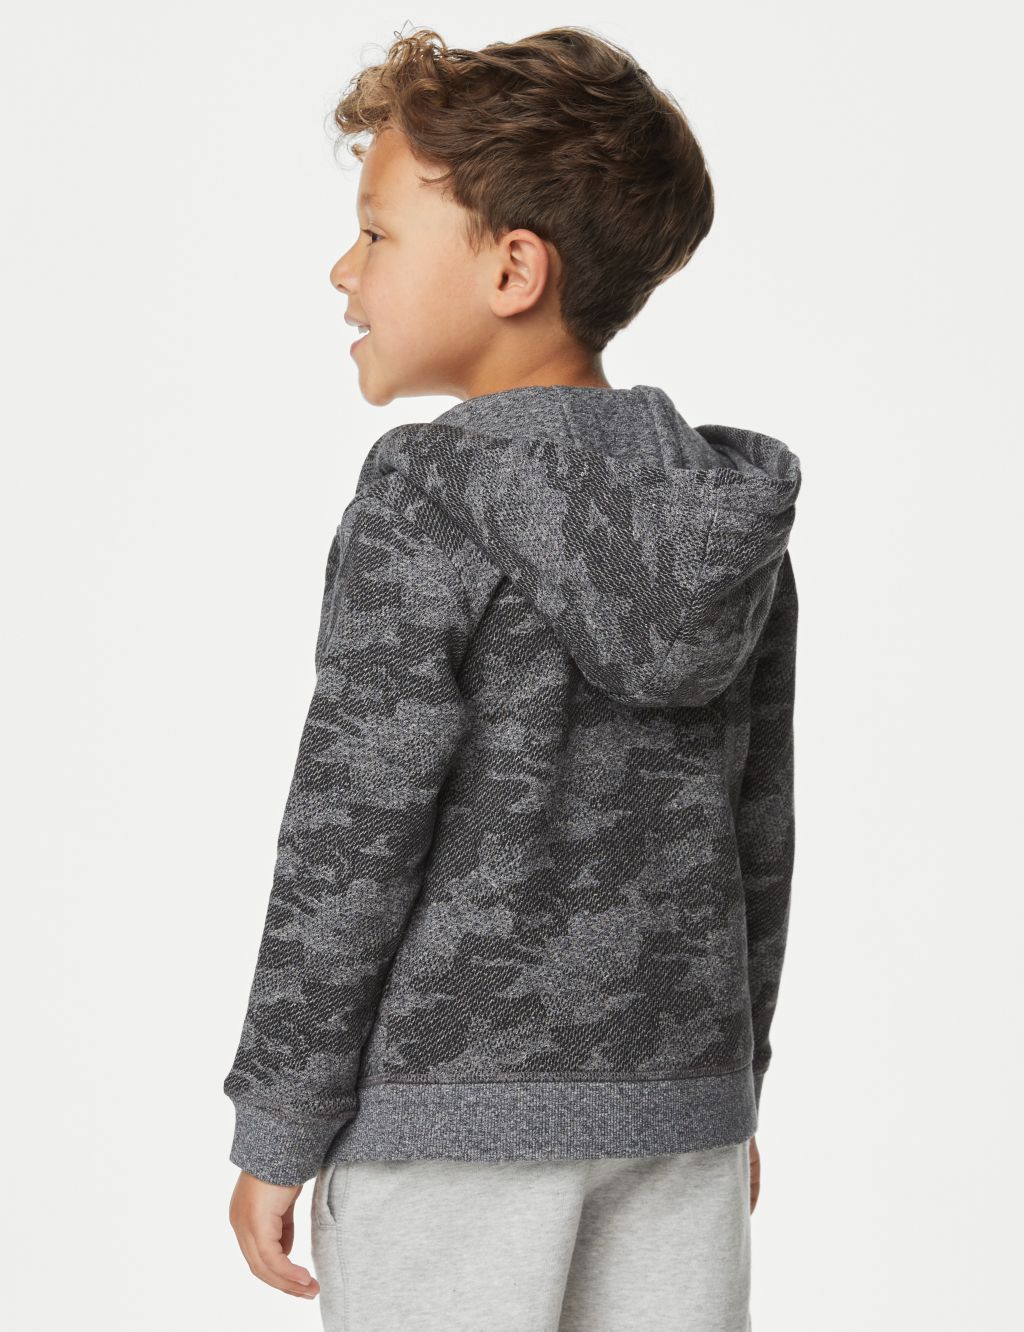 Cotton Rich Patterned Zip Hoodie (2-8 Yrs) image 3